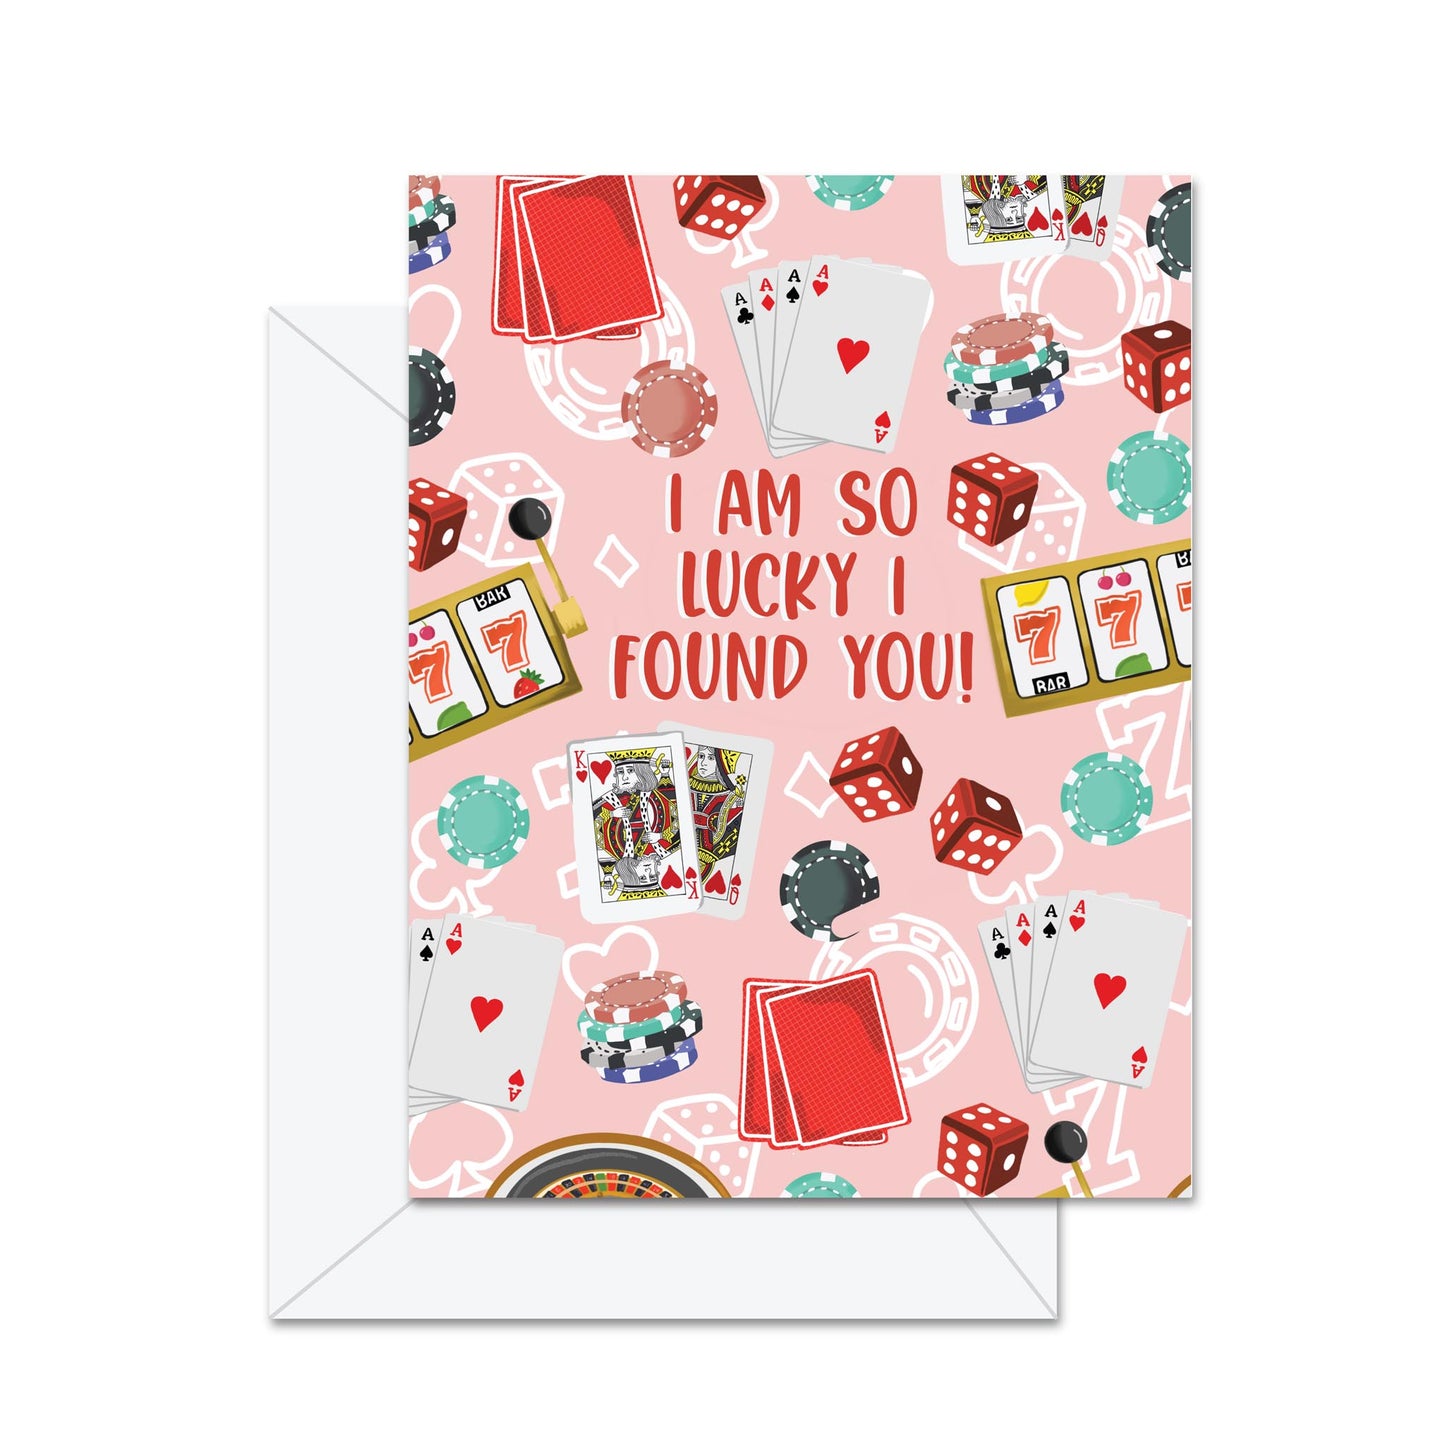 I Am So Lucky I Found You! - Greeting Card